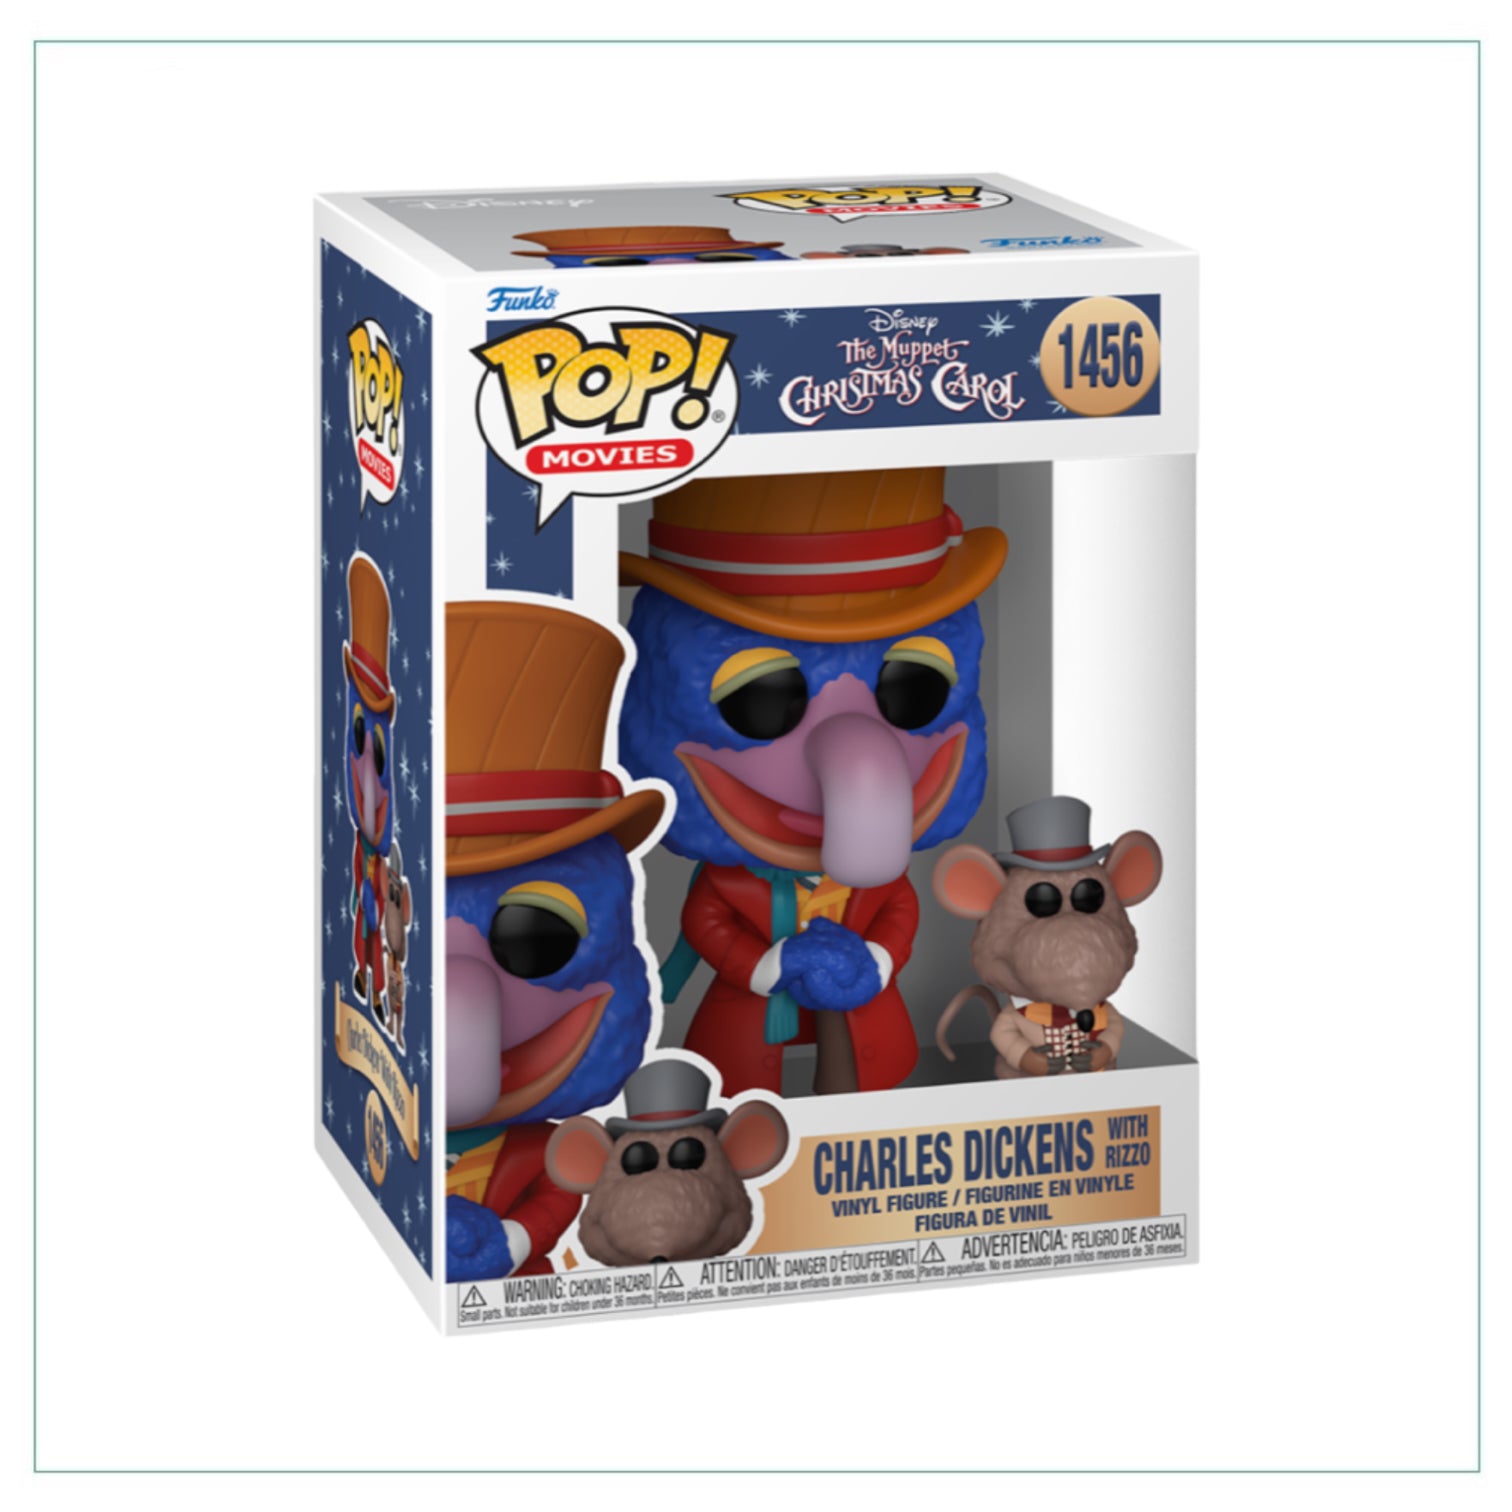 Charles Dickens W/ Rizzo #1456 Funko Pop! The Muppets Christmas Carol - PREORDER